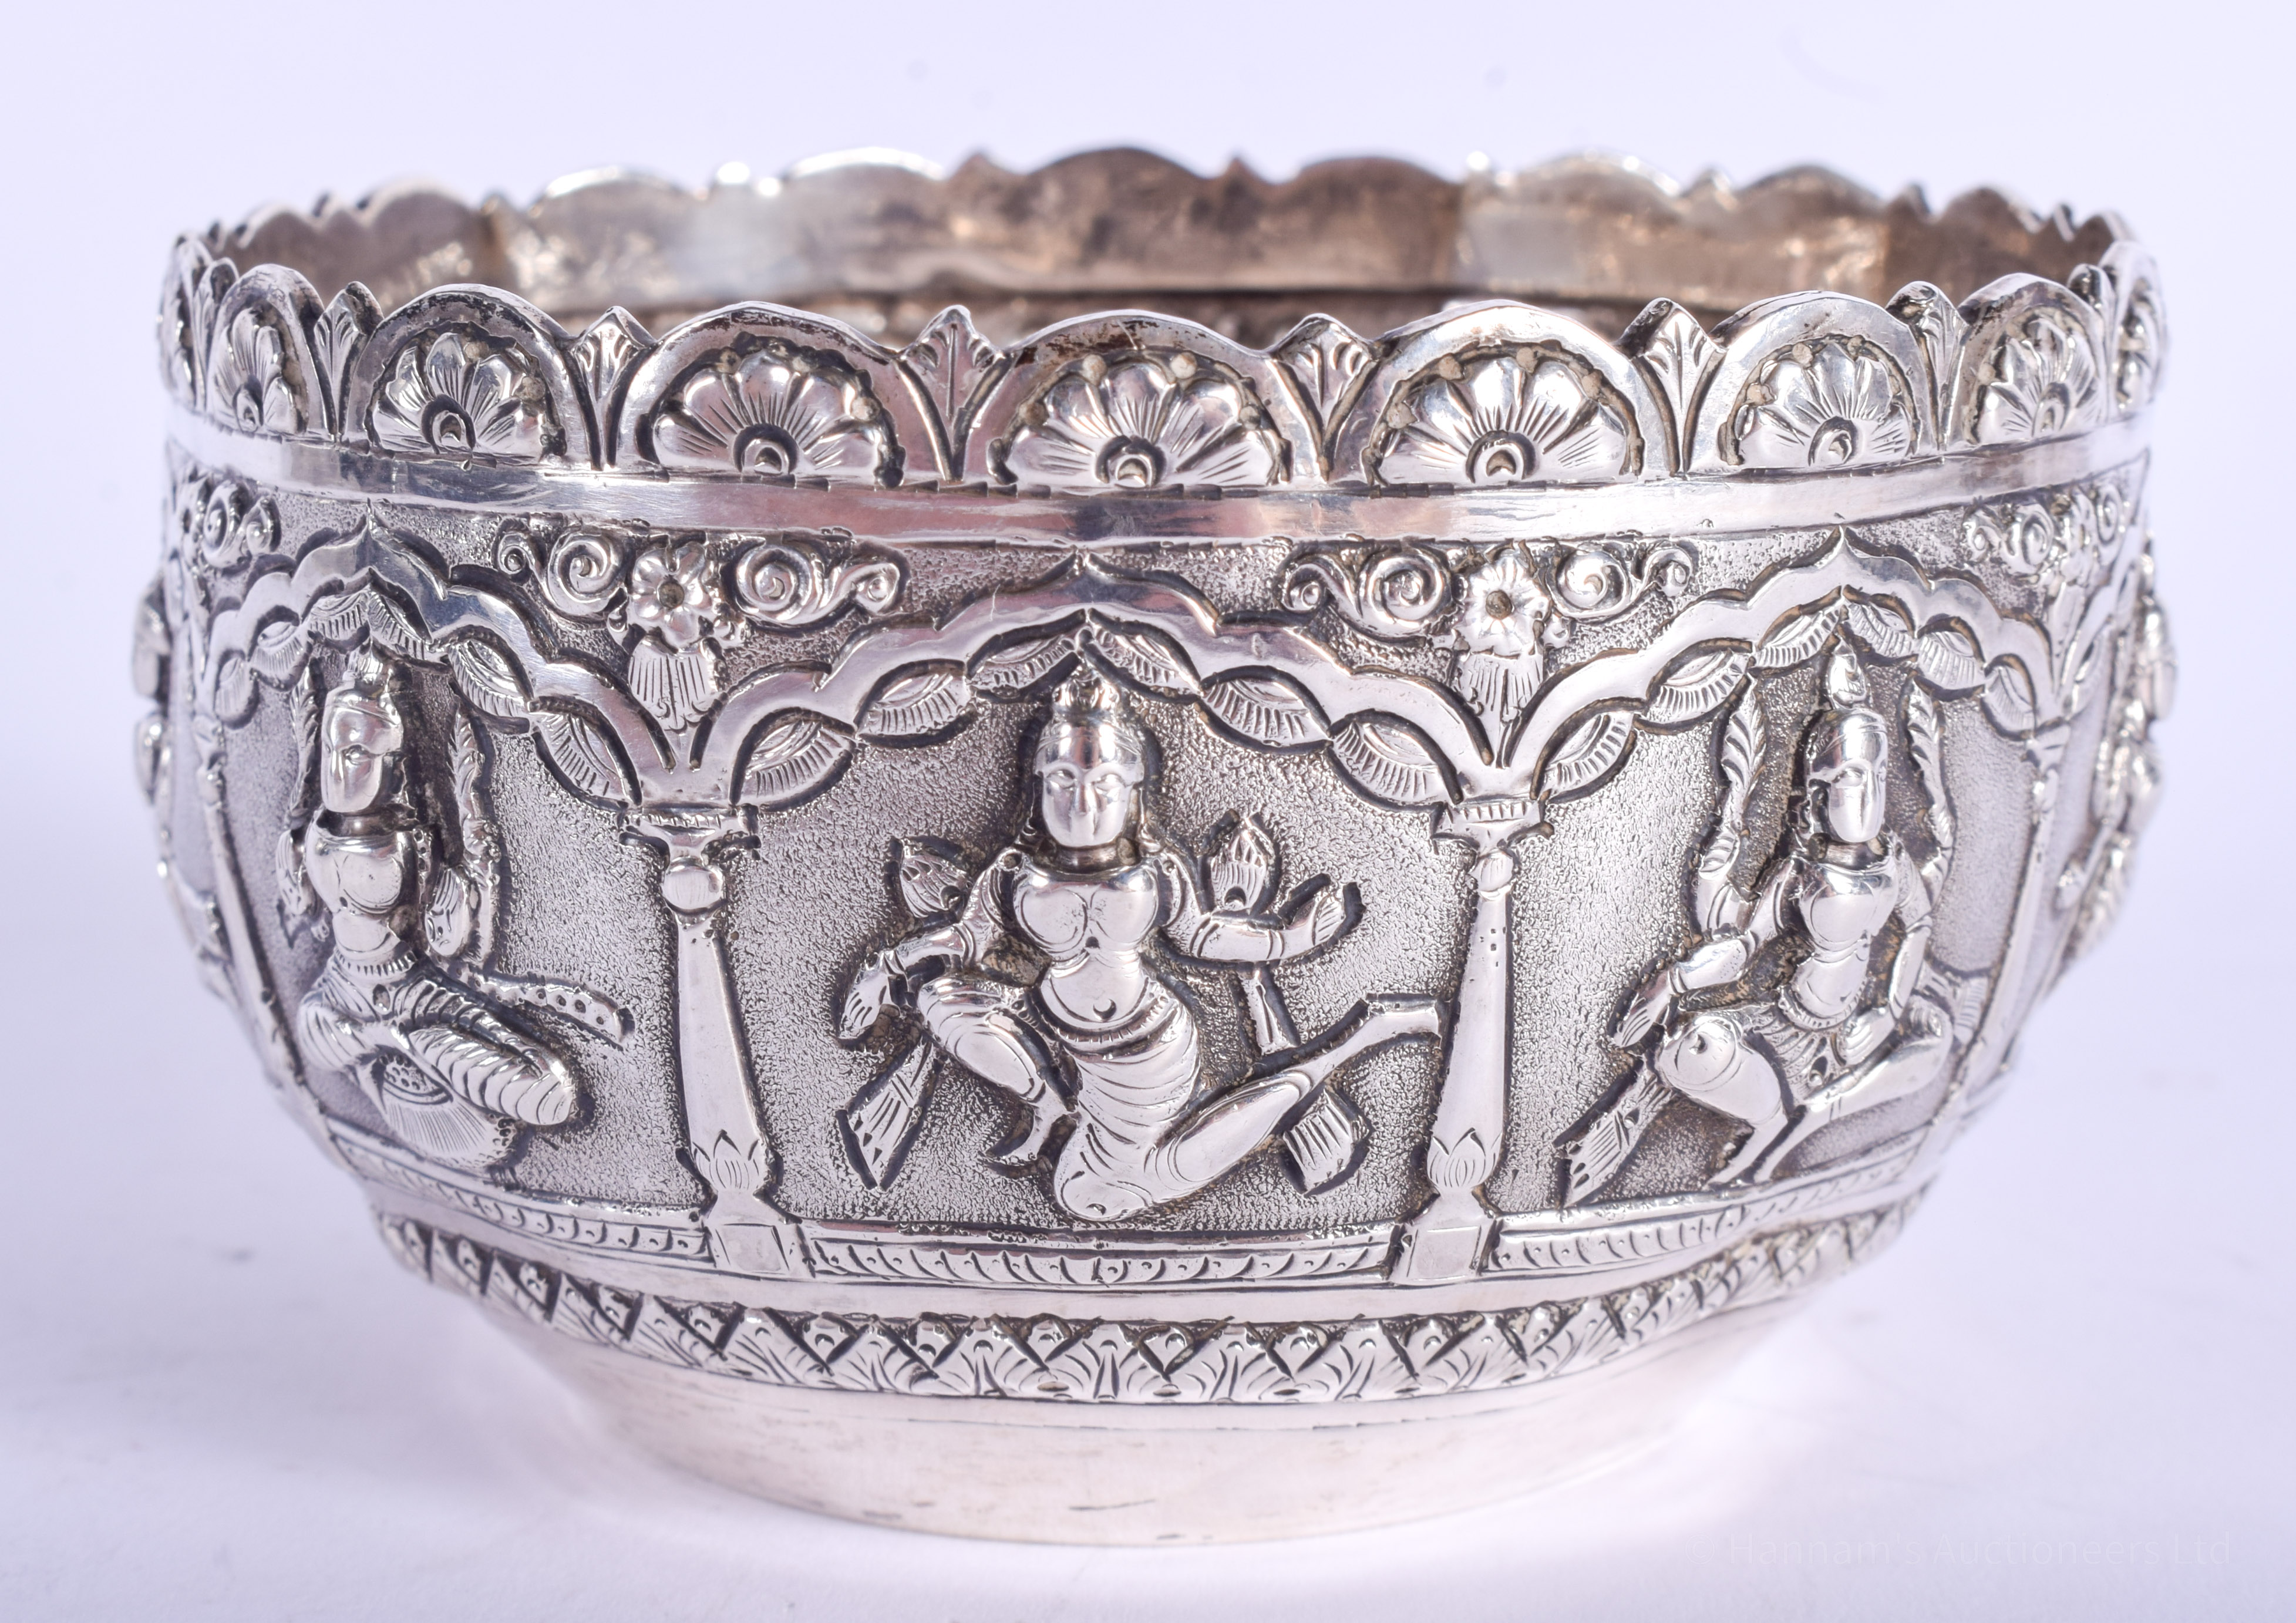 A VERY UNUSUAL ENGLISH SILVER INDIAN STYLE SUGAR BOWL. 95 grams. 9.5 cm wide. - Image 3 of 6